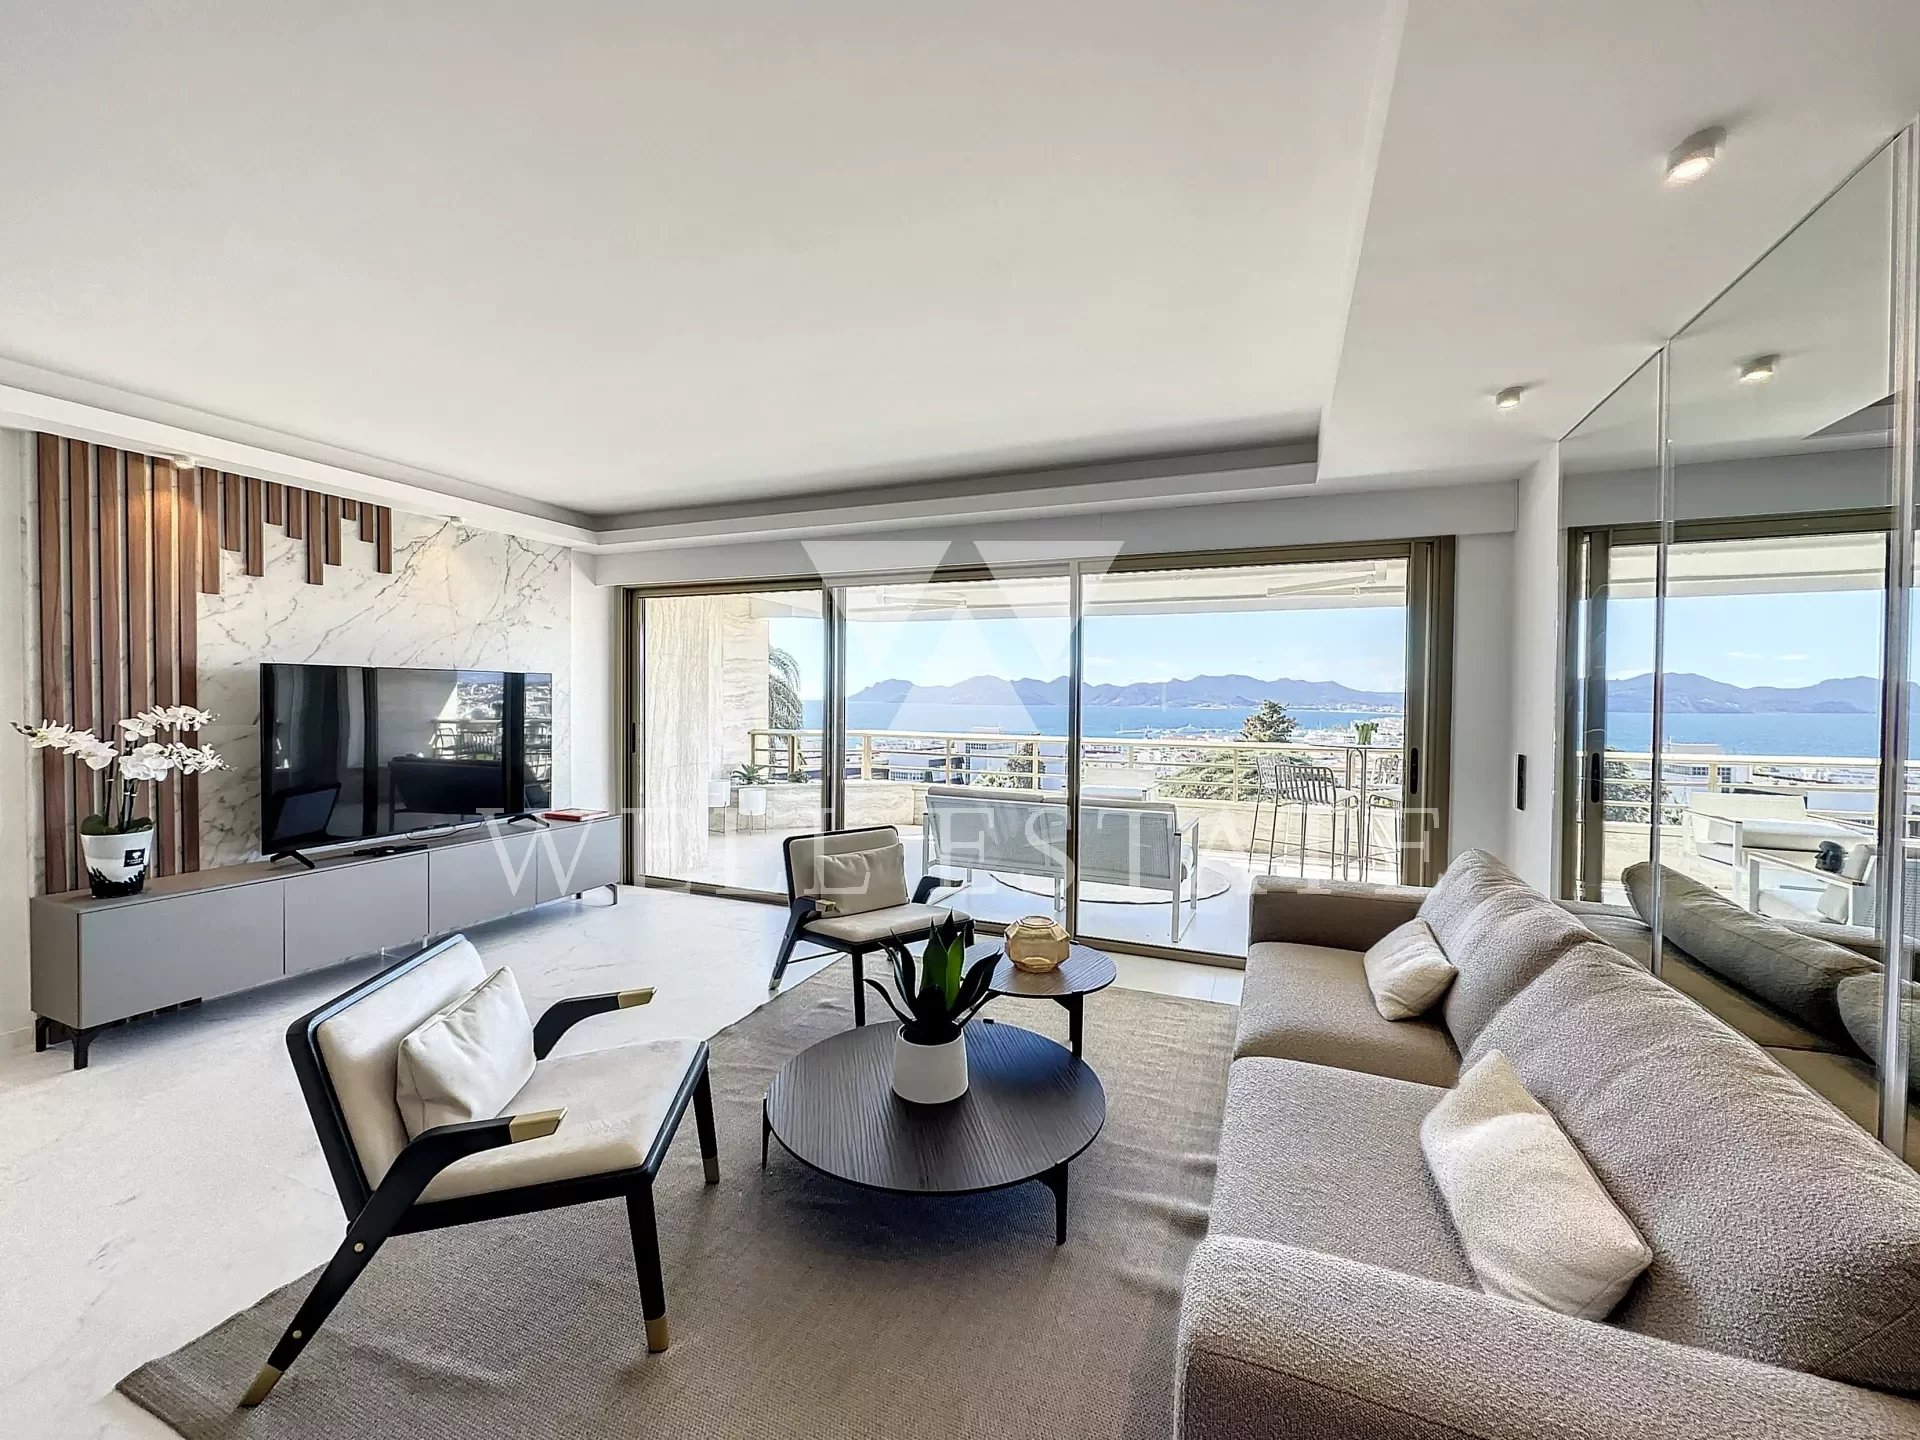 CANNES BASSE CALIFORNIE 3-BEDROOM APARTMENT ON UPPER FLOOR WITH SEA VIEW